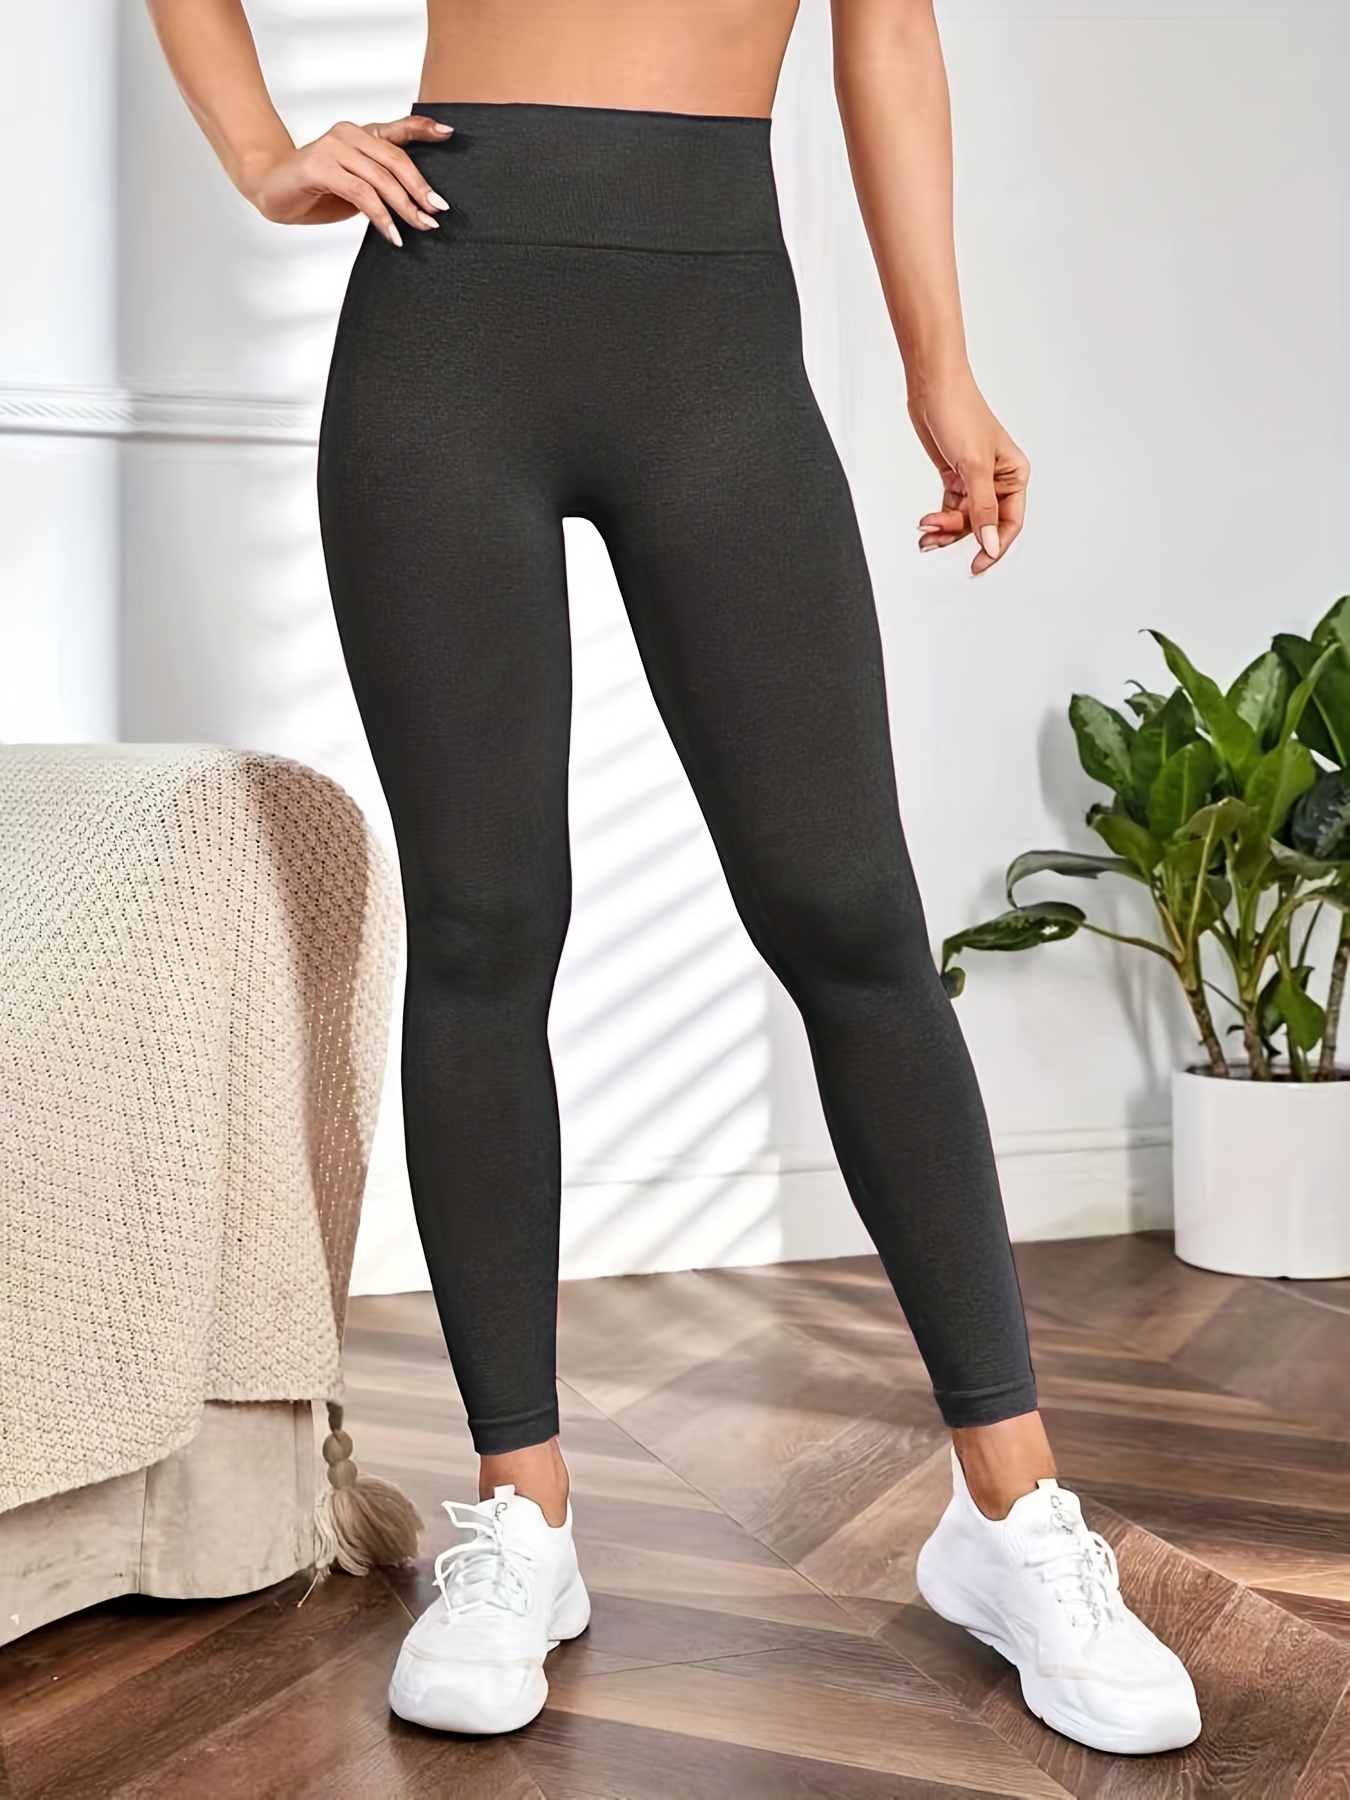 Black Workout Pants for Every Body Type